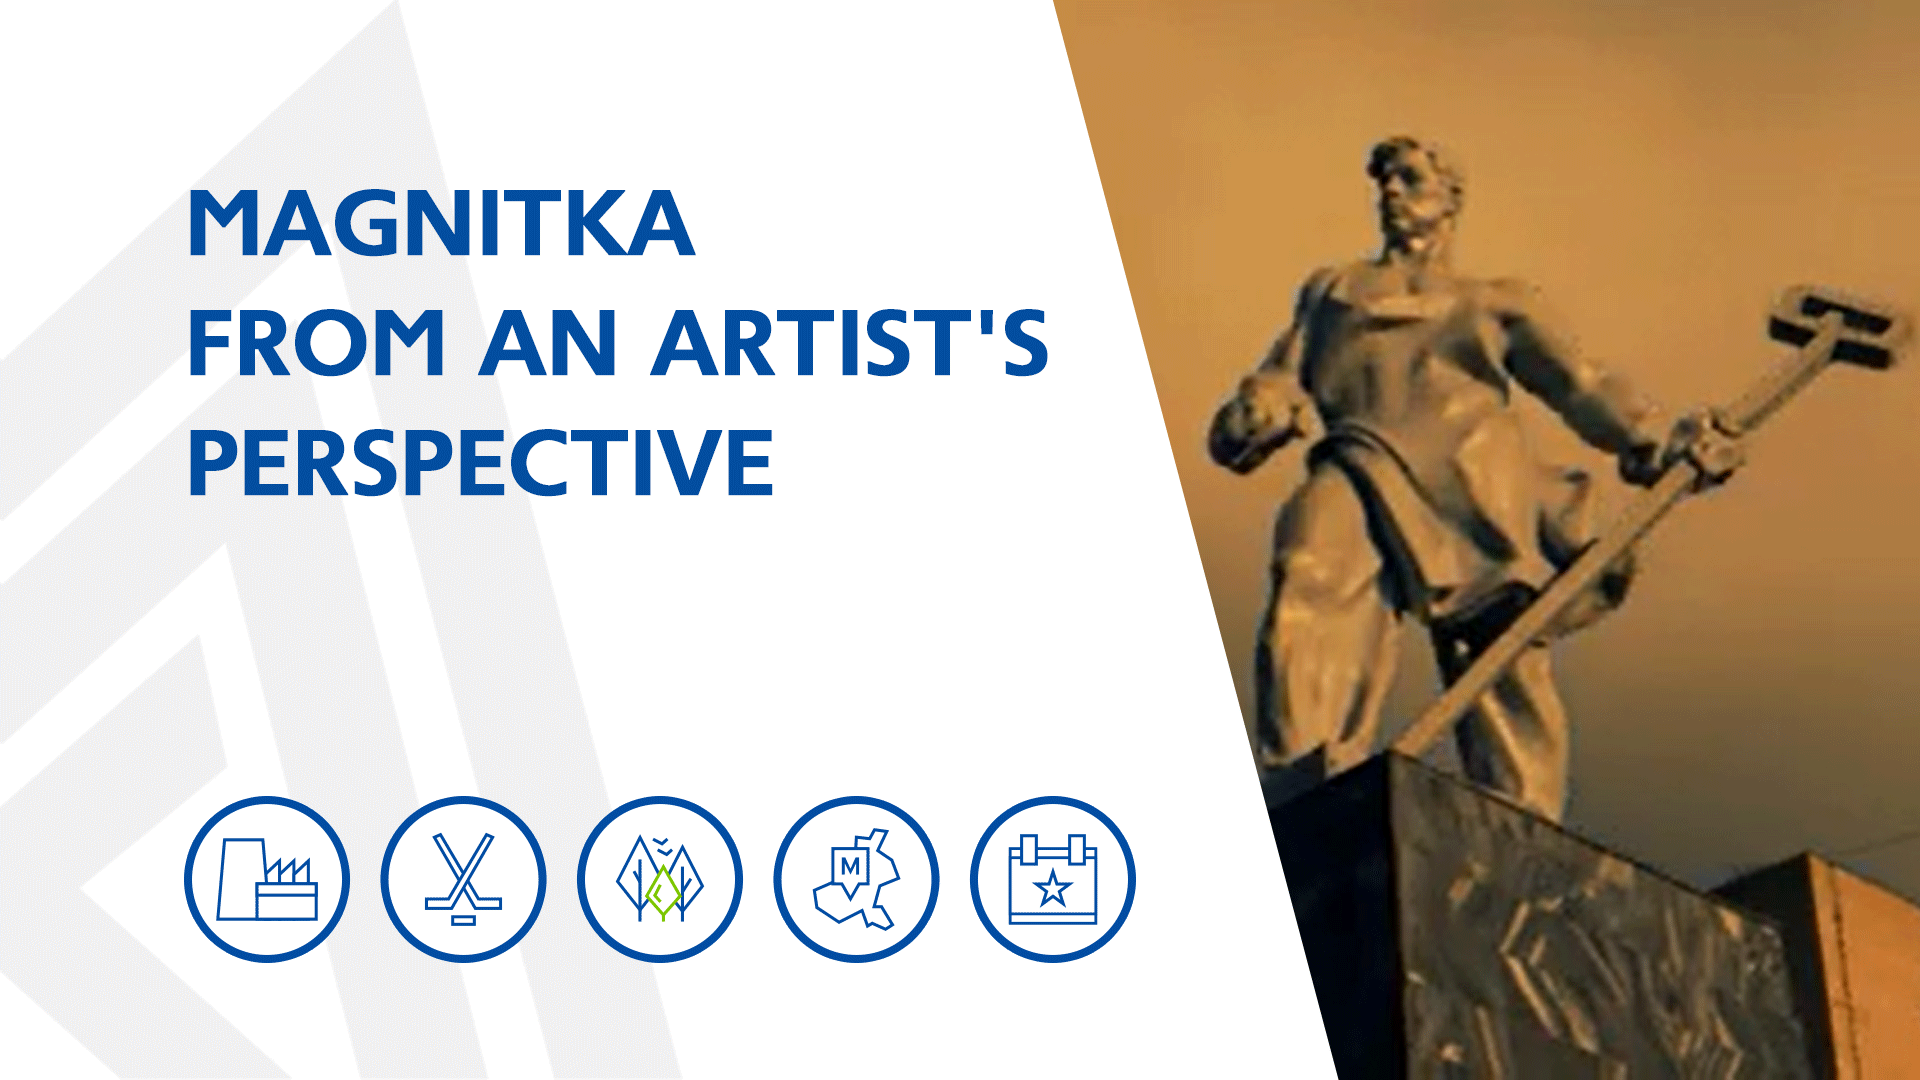 Magnitka from an Artist's Perspective. Presented by